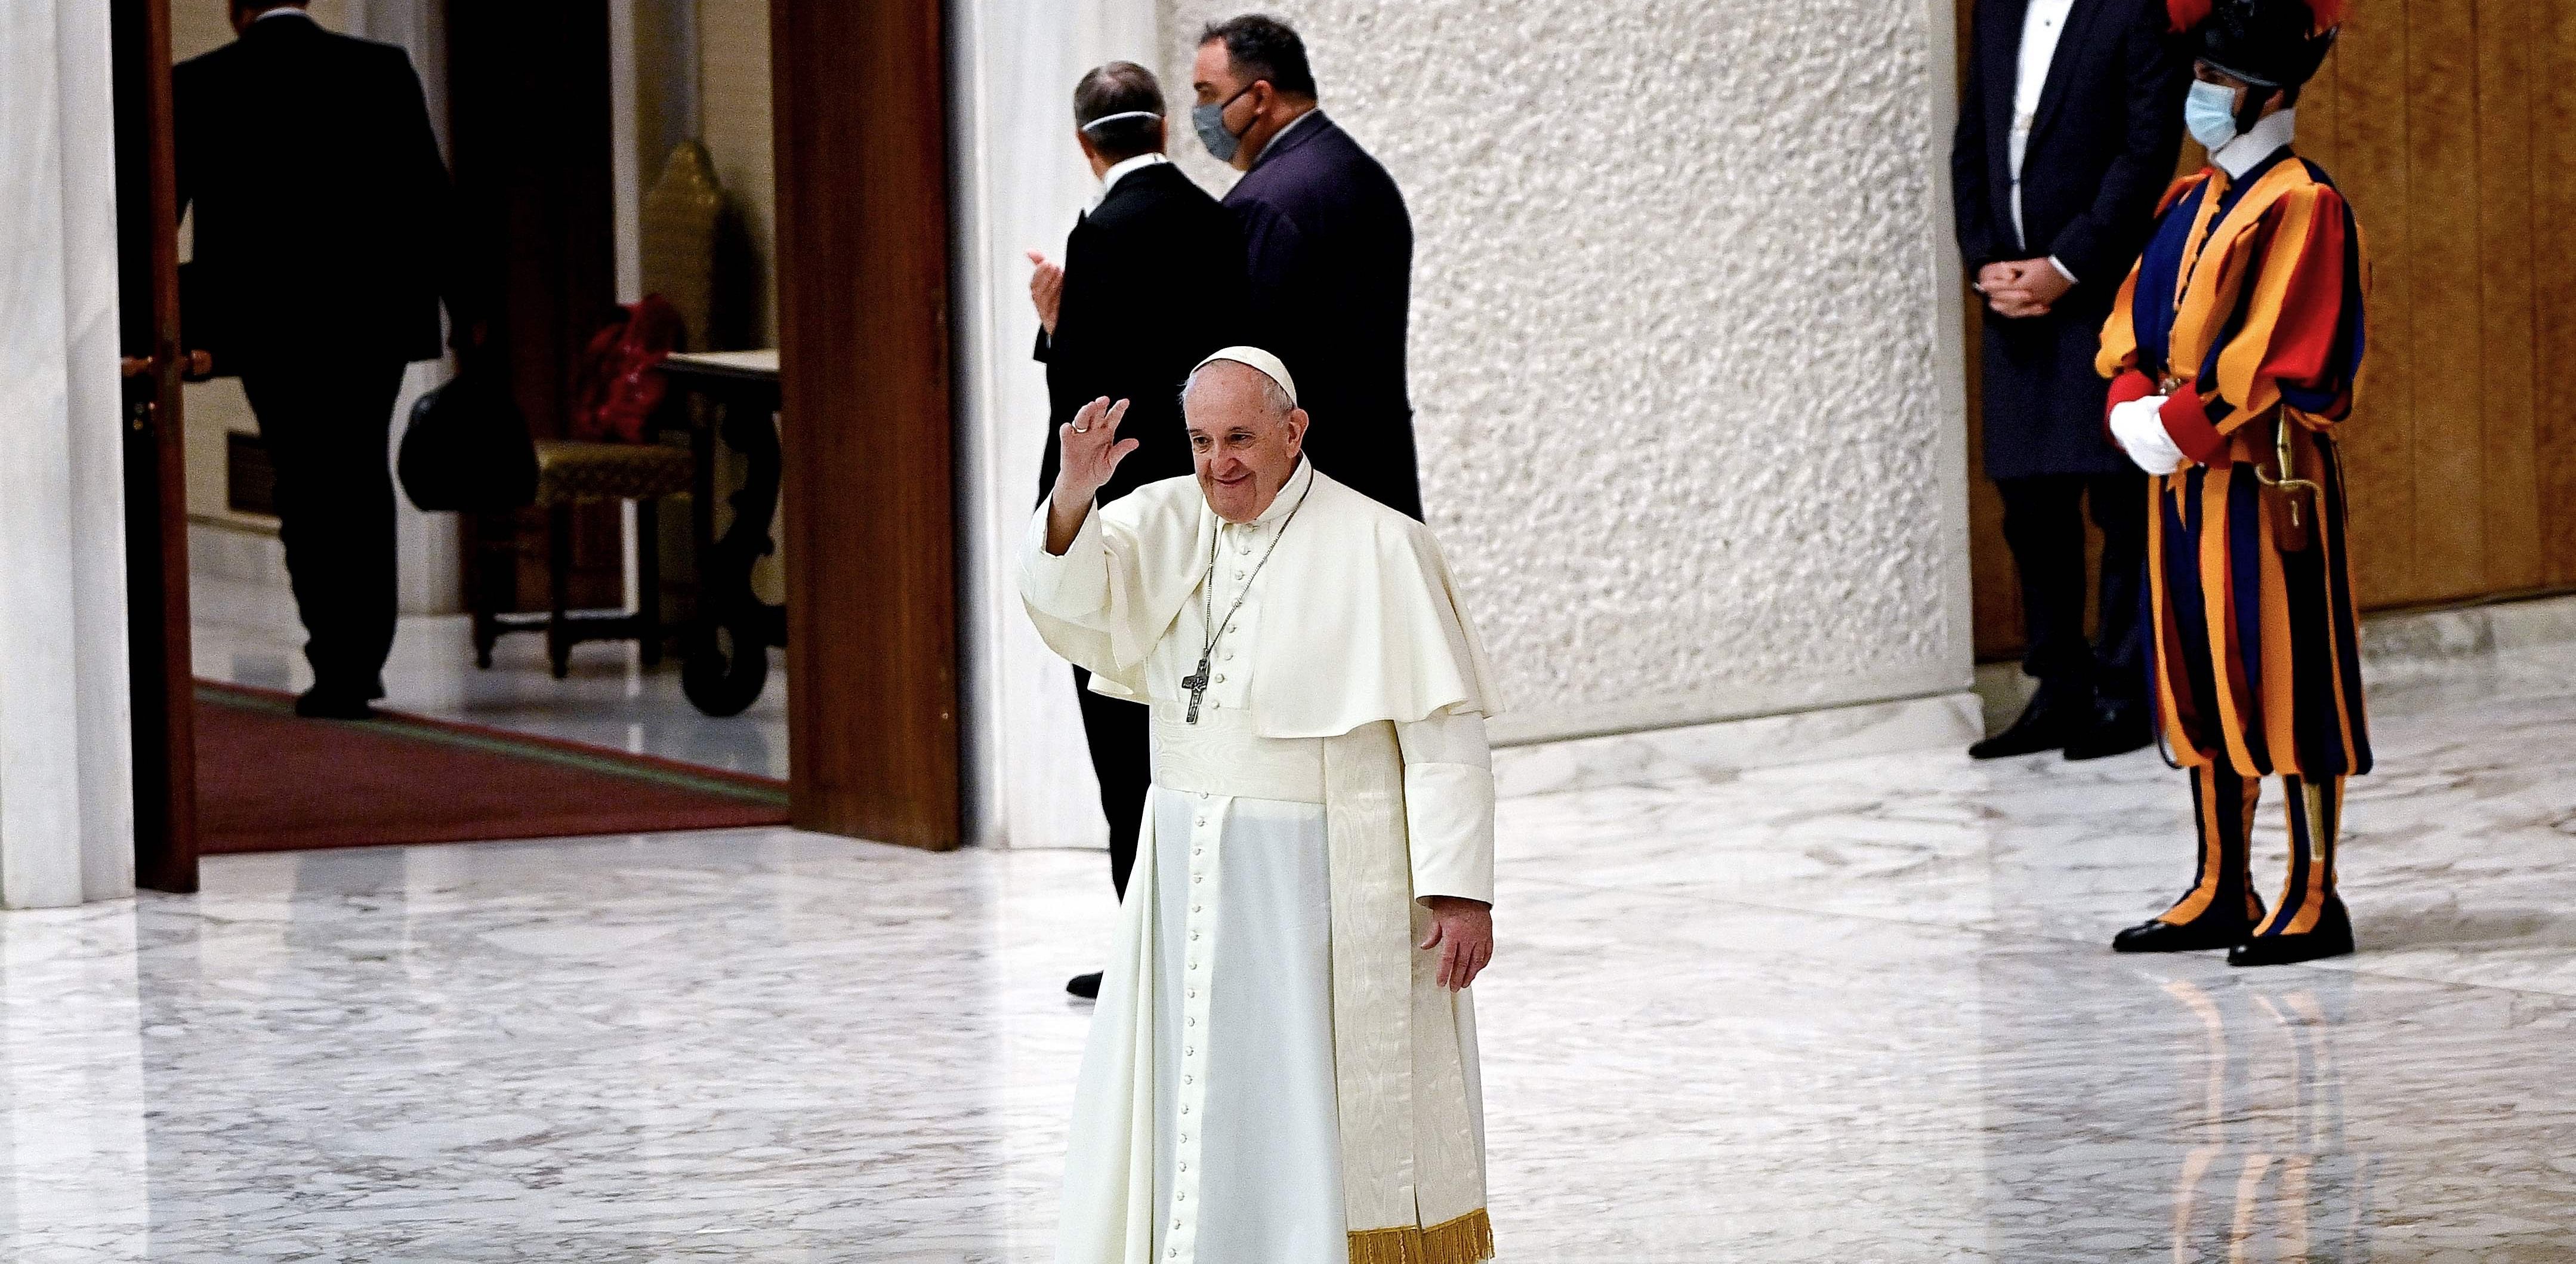 Pope Francis (C) waves at the end of his weekly general audience at the Paul VI hall at the Vatican. Credit: AFP